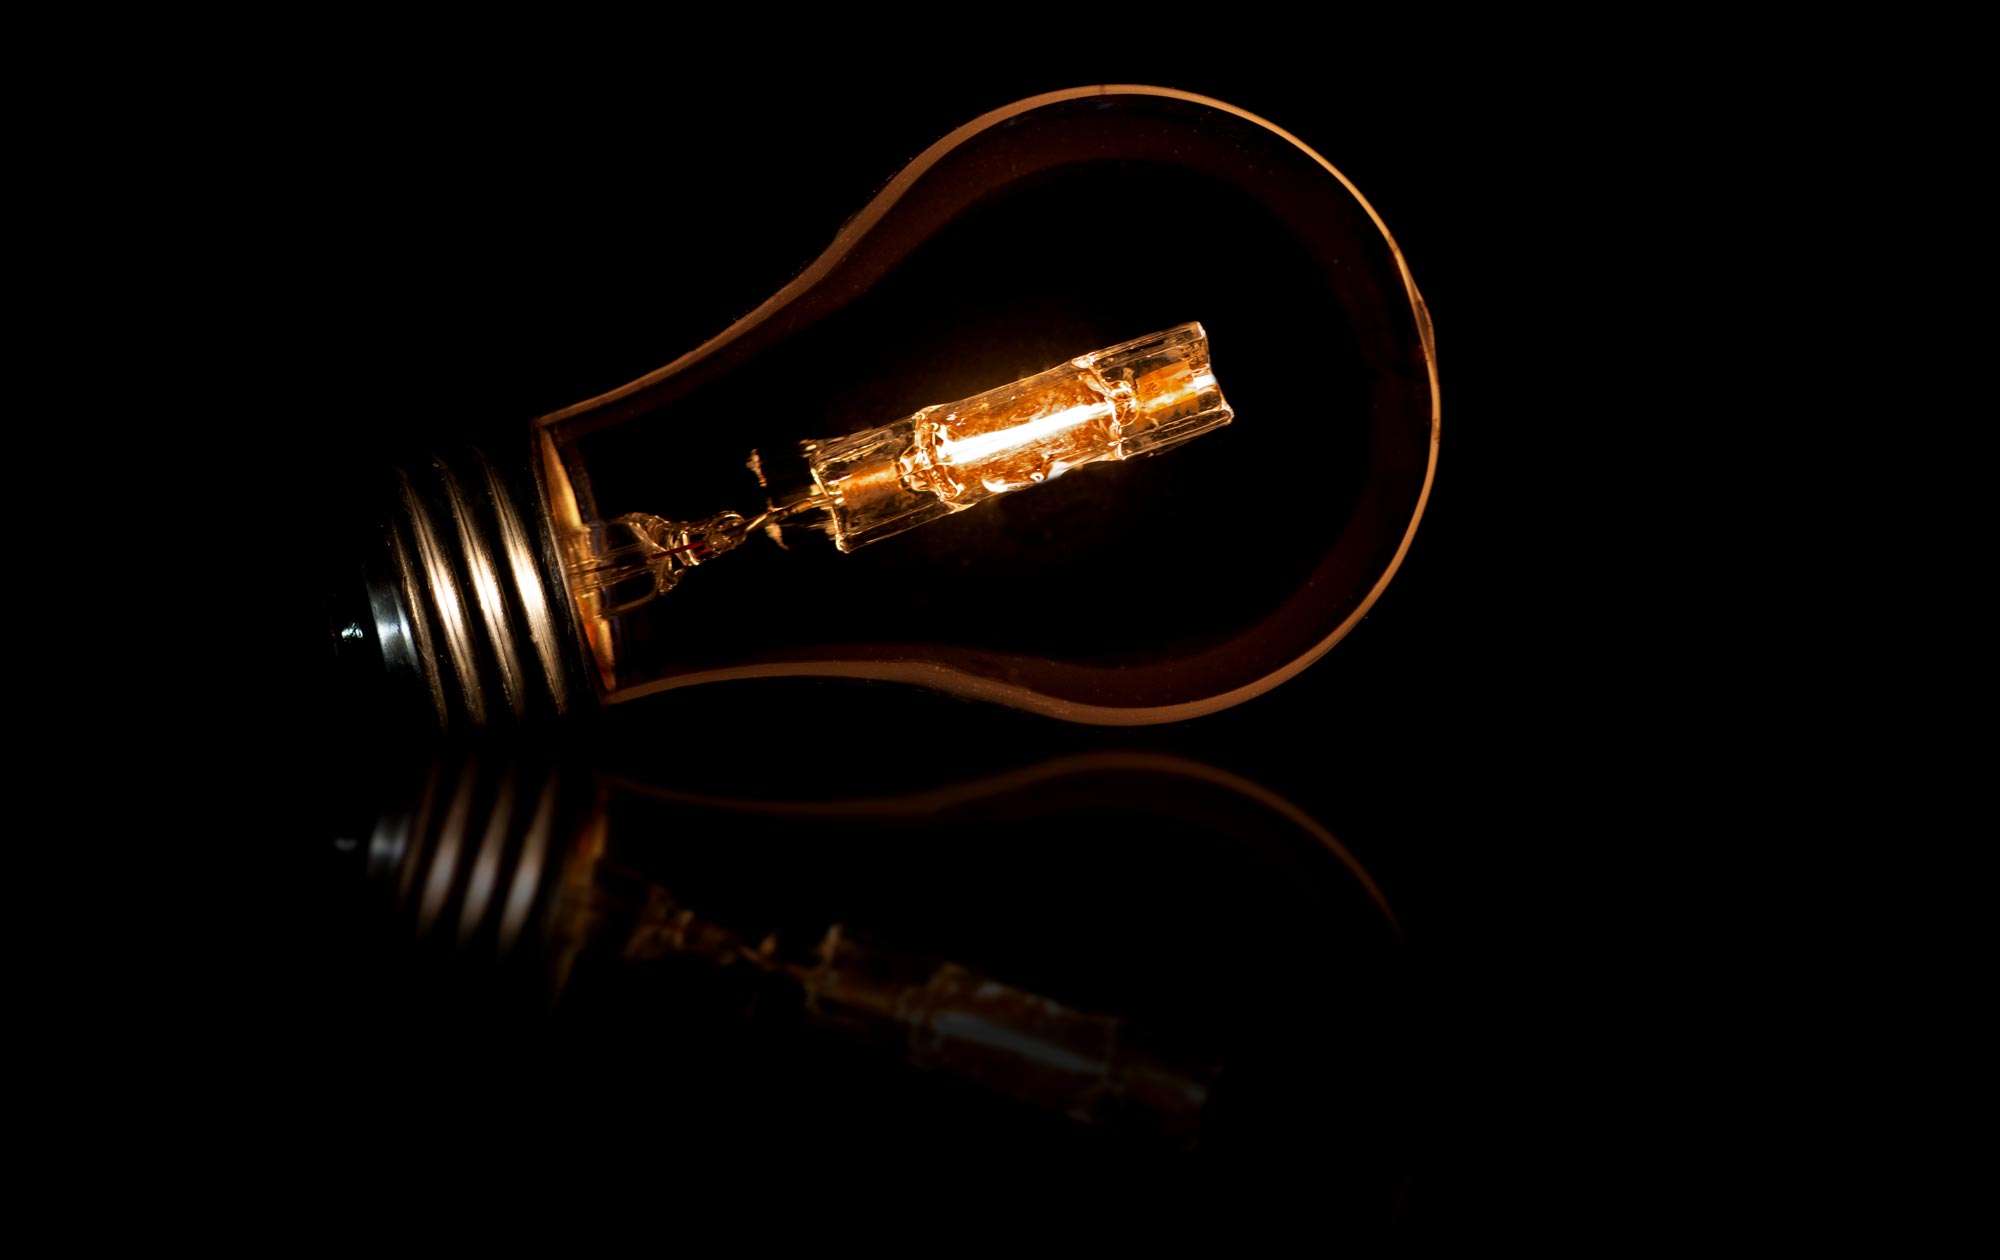 photographing light bulb example2